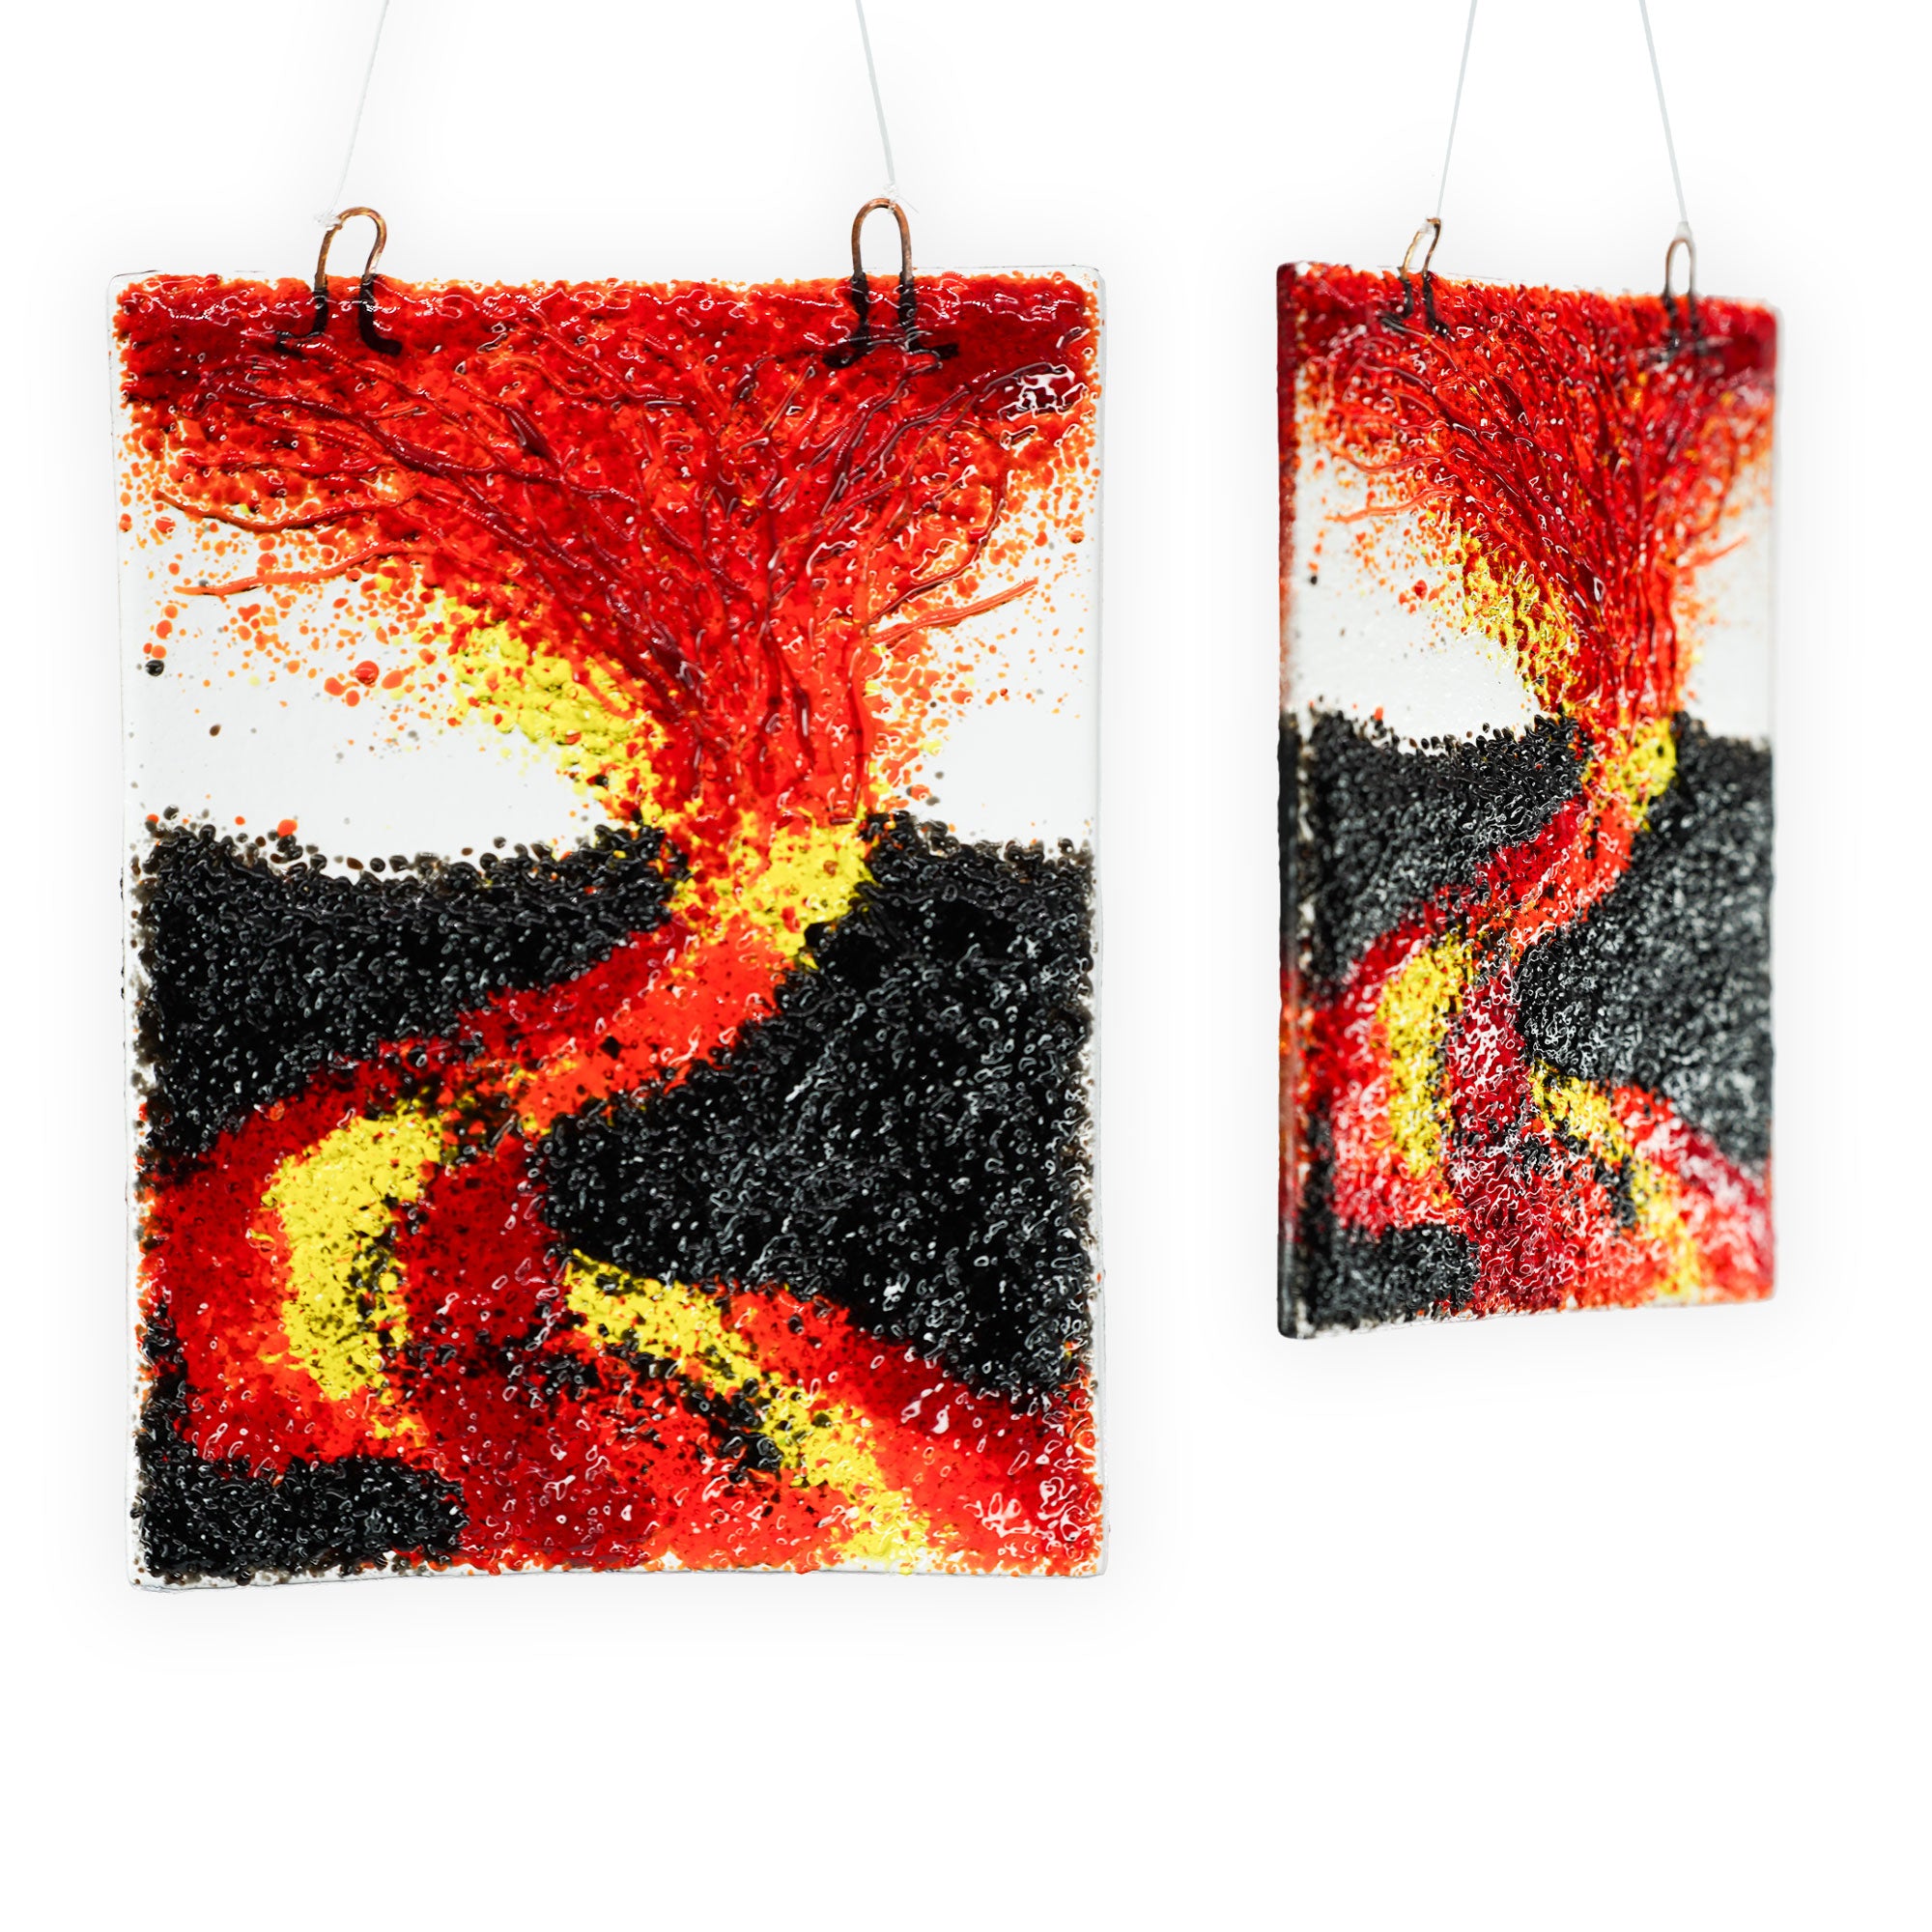 Large Handmade Stained Glass 3D Ornament - Lava River